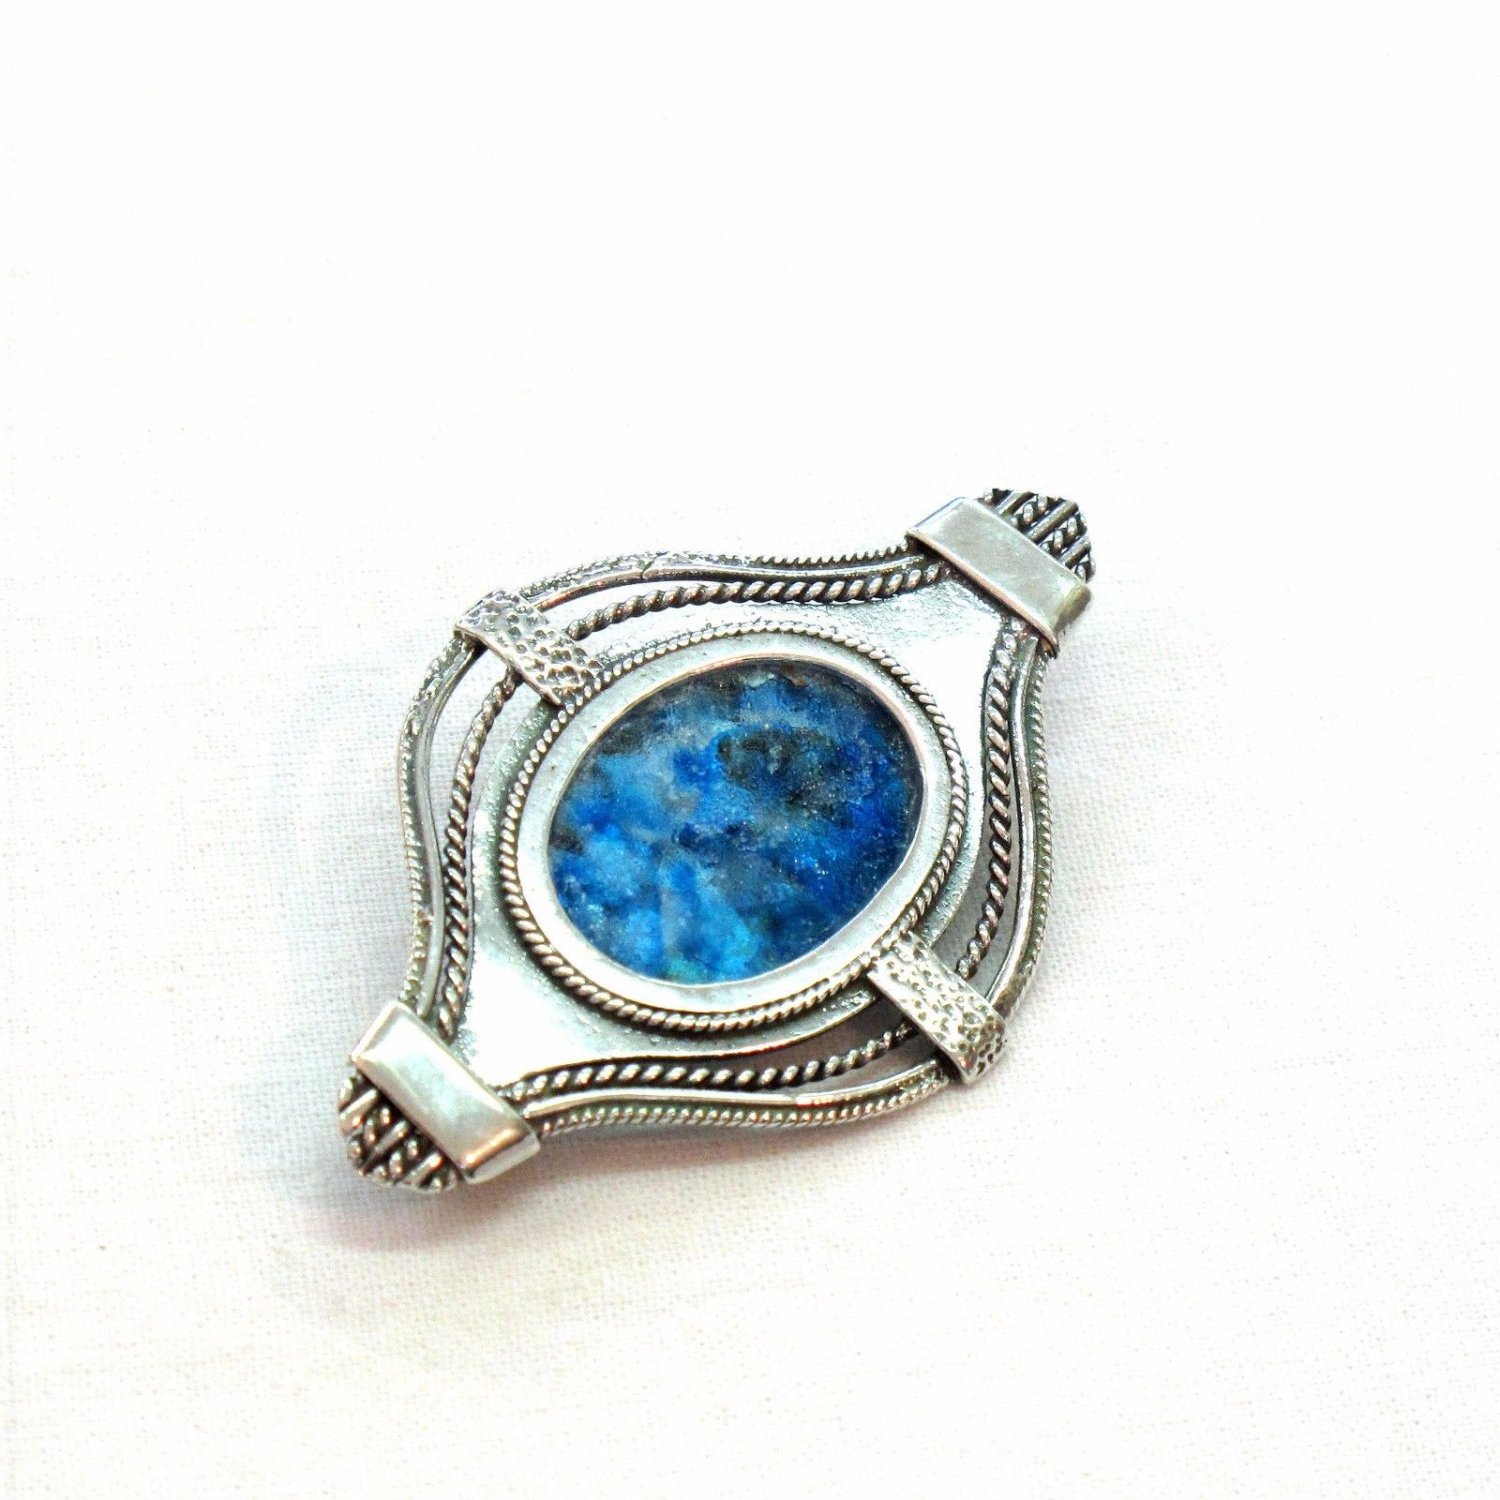 Roman Glass and Sterling Silver Brooch from Israel Michal Kirat Jewelry